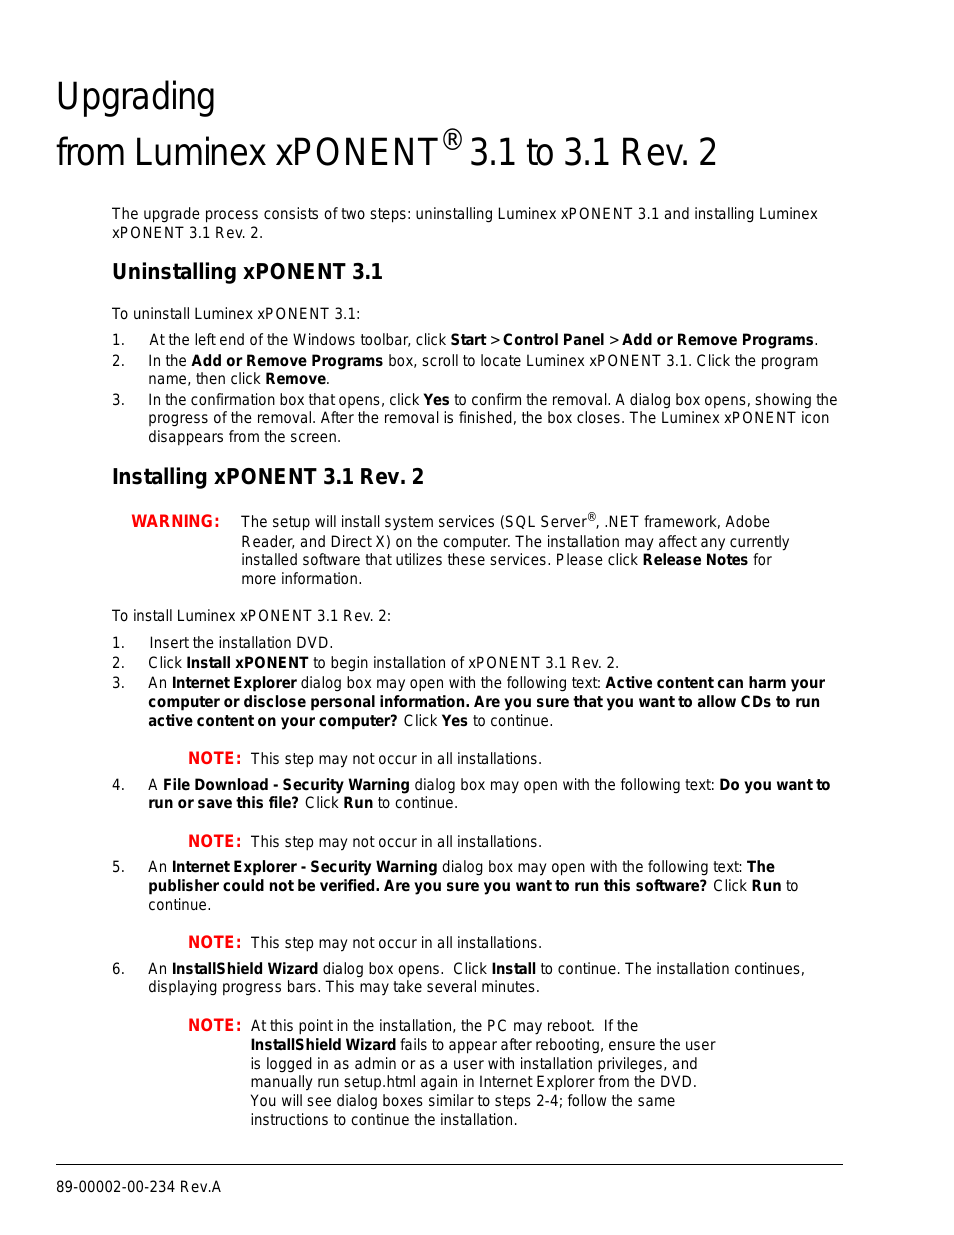 xPONENT 3.1 to xPONENT 3.1 Rev 2 Upgrade Instructions